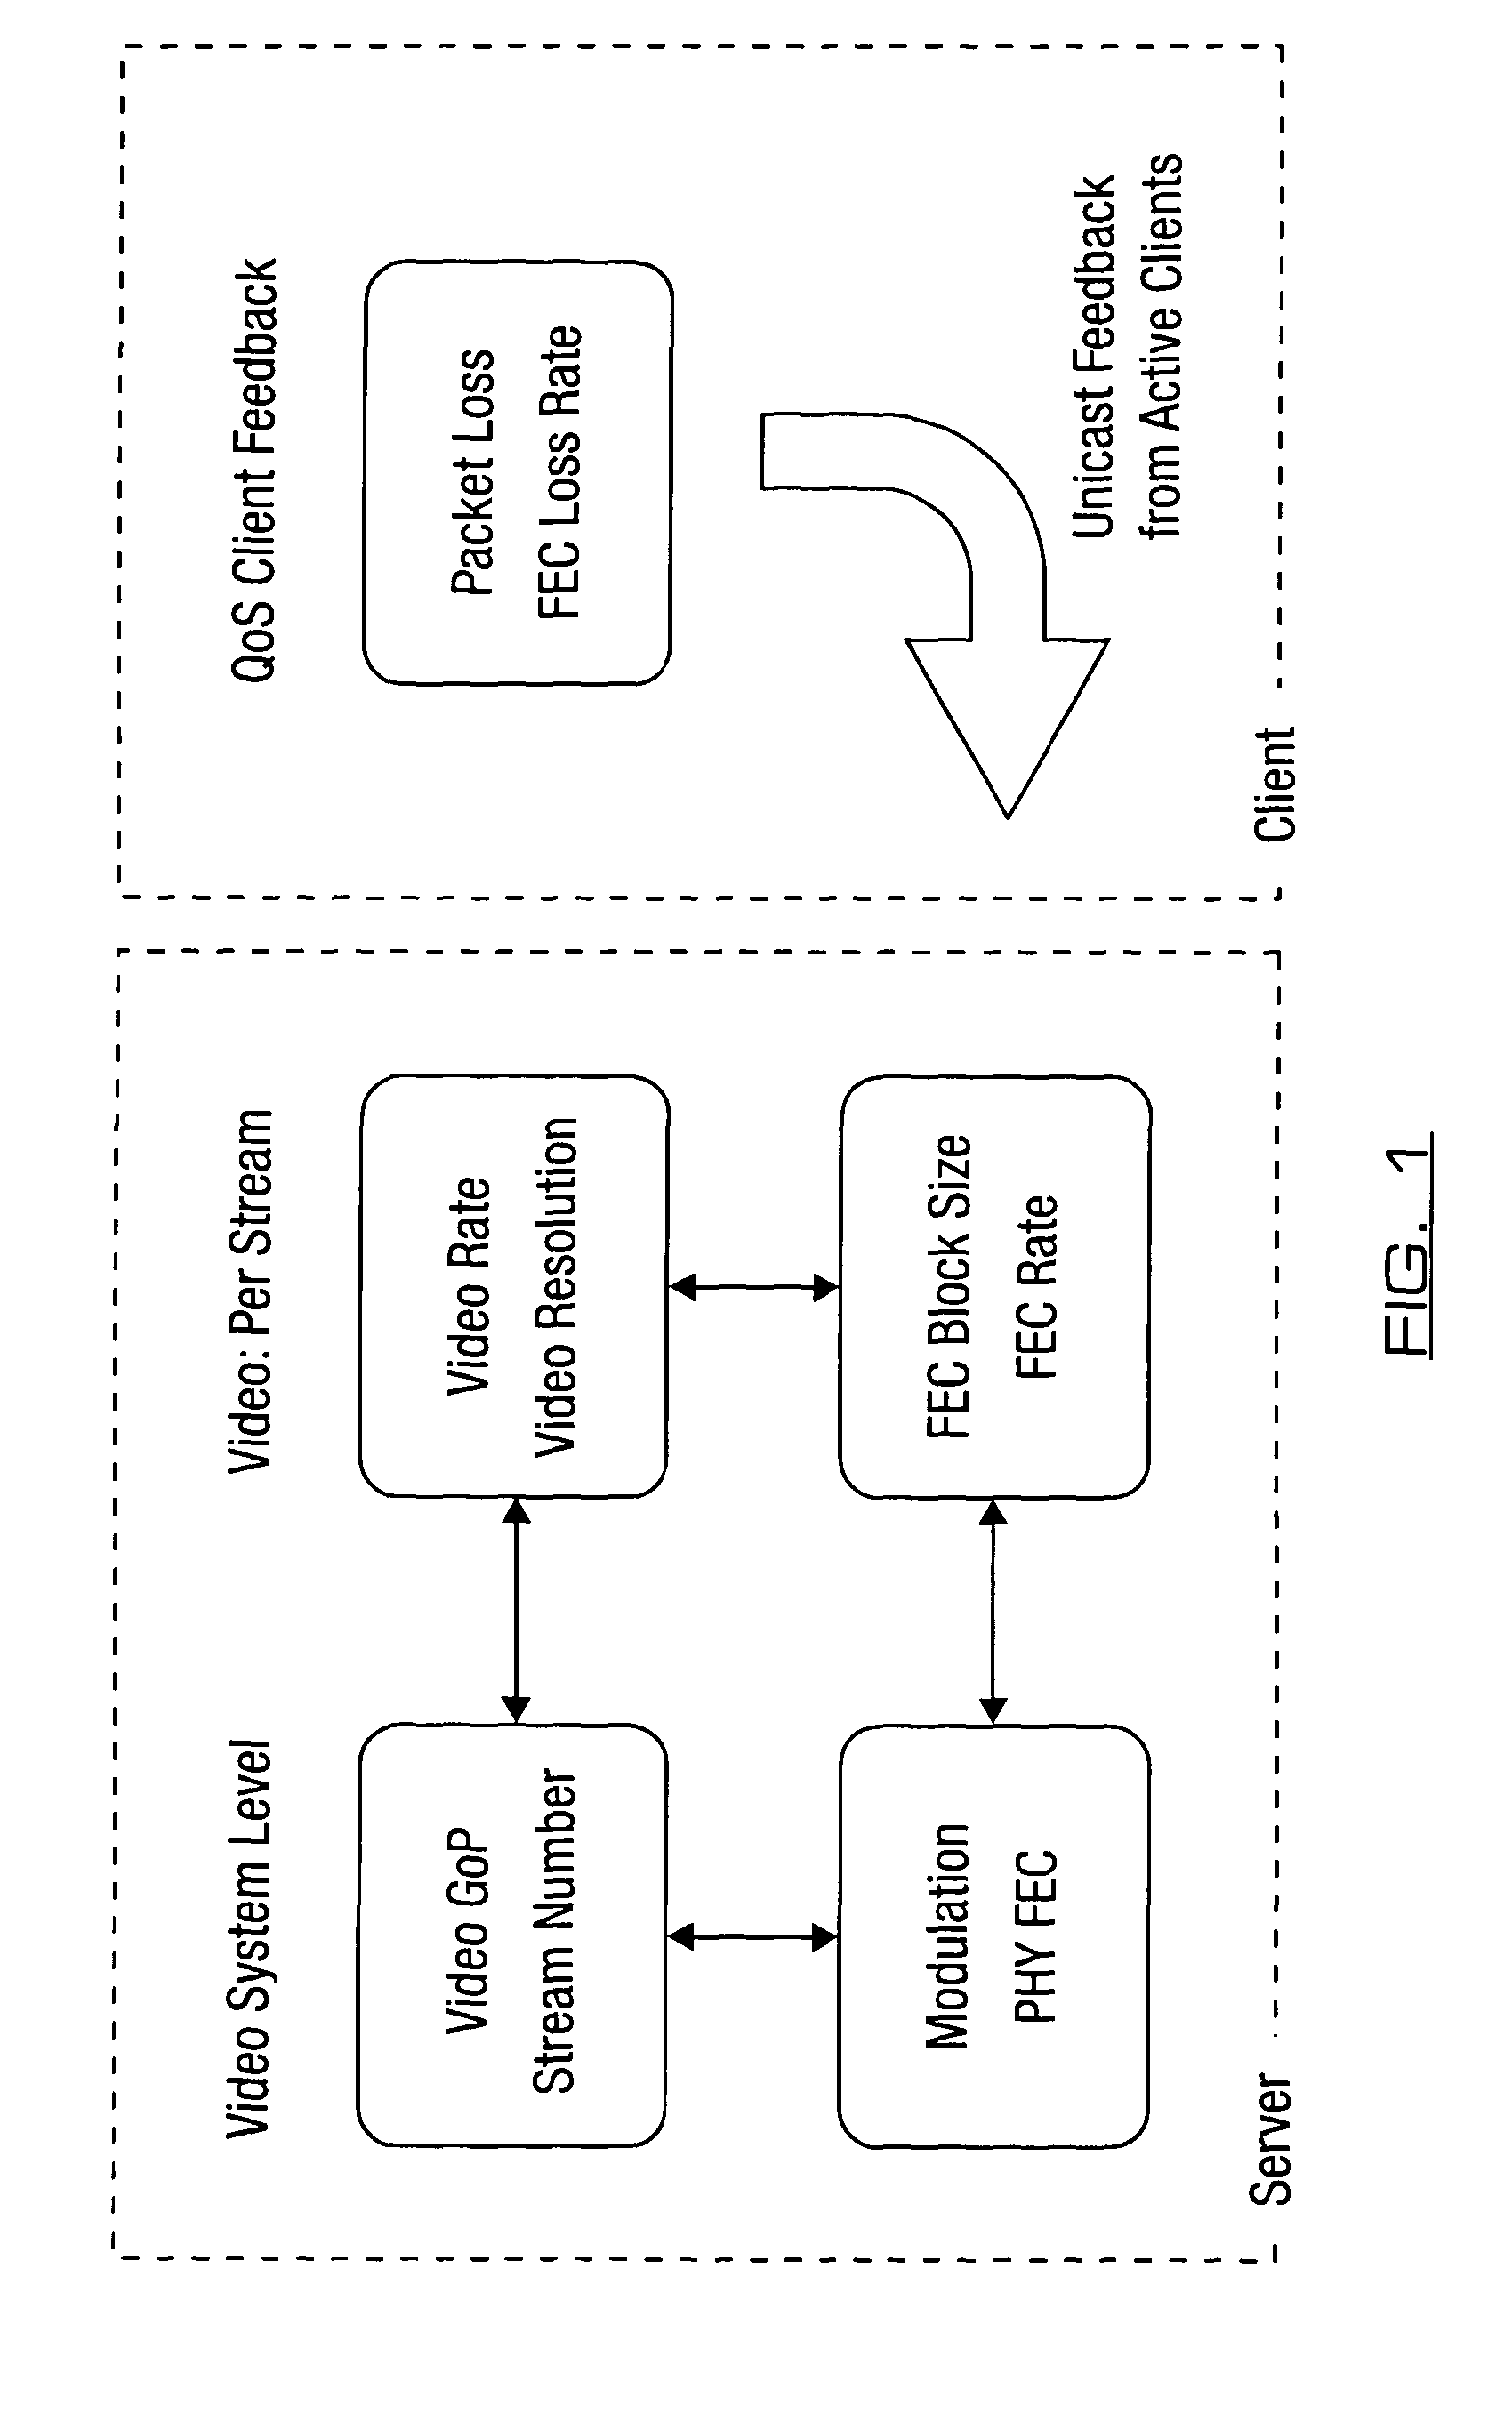 Data transmission apparatus, system and method